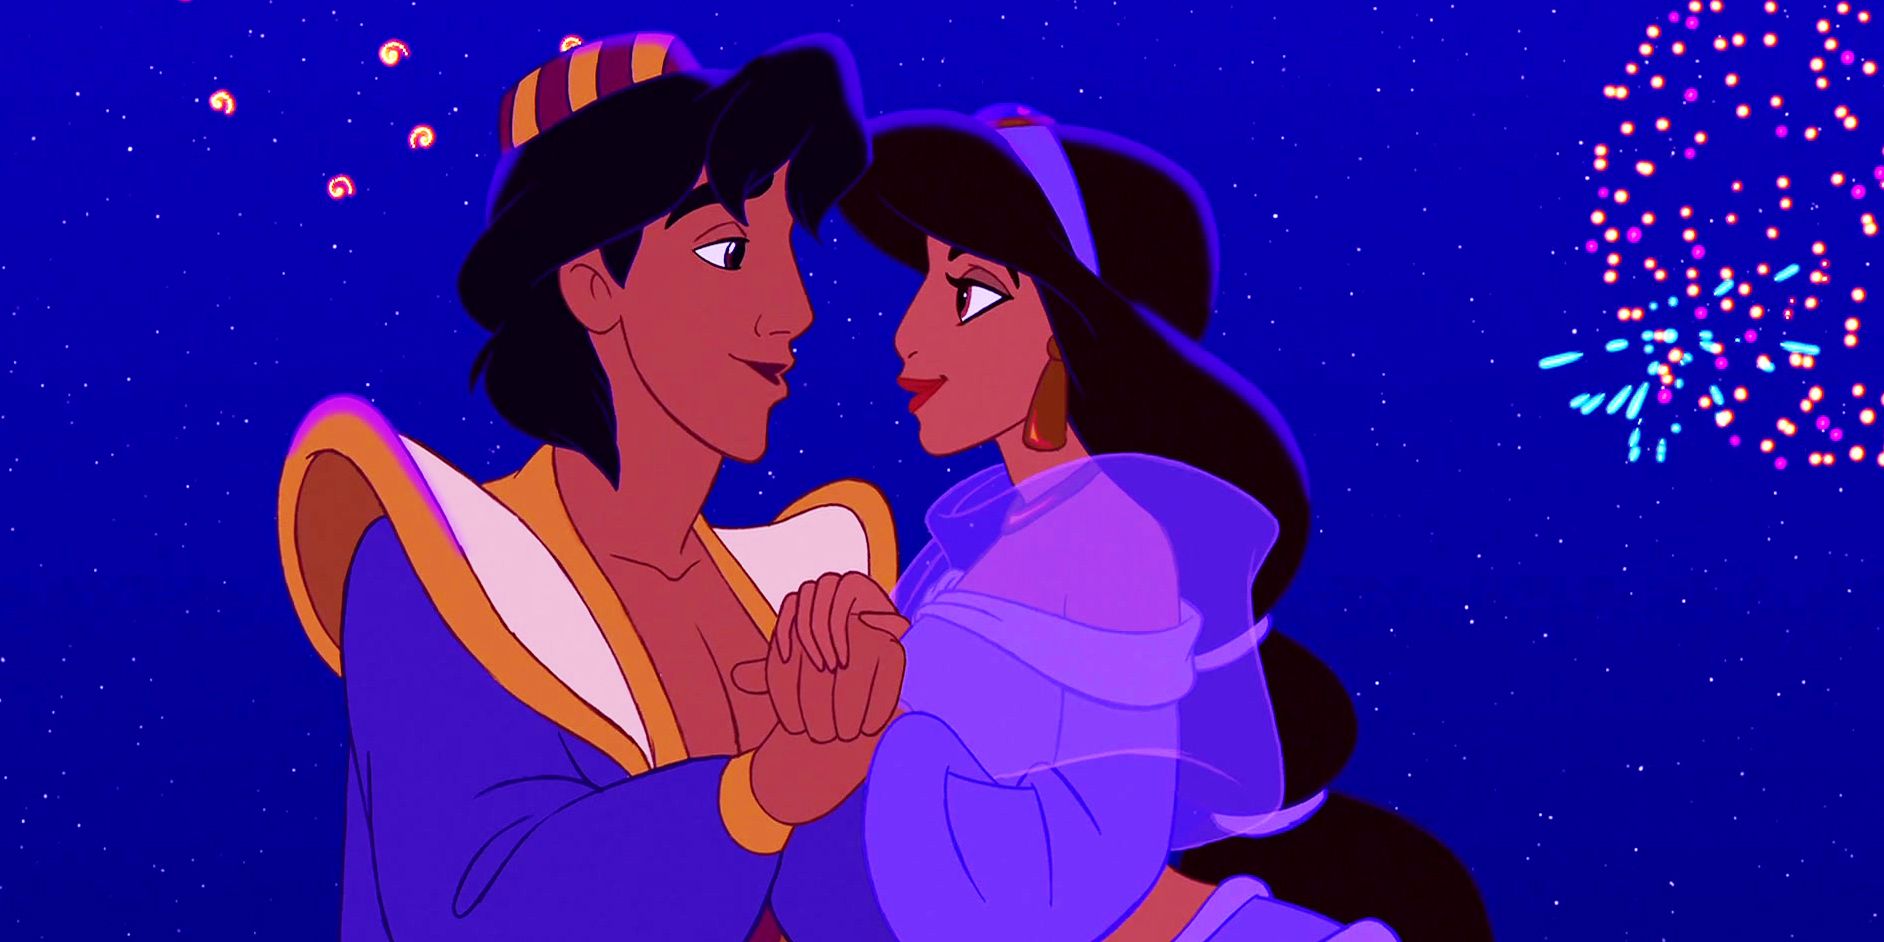 Aladdin and Jasmine at the end of the movie